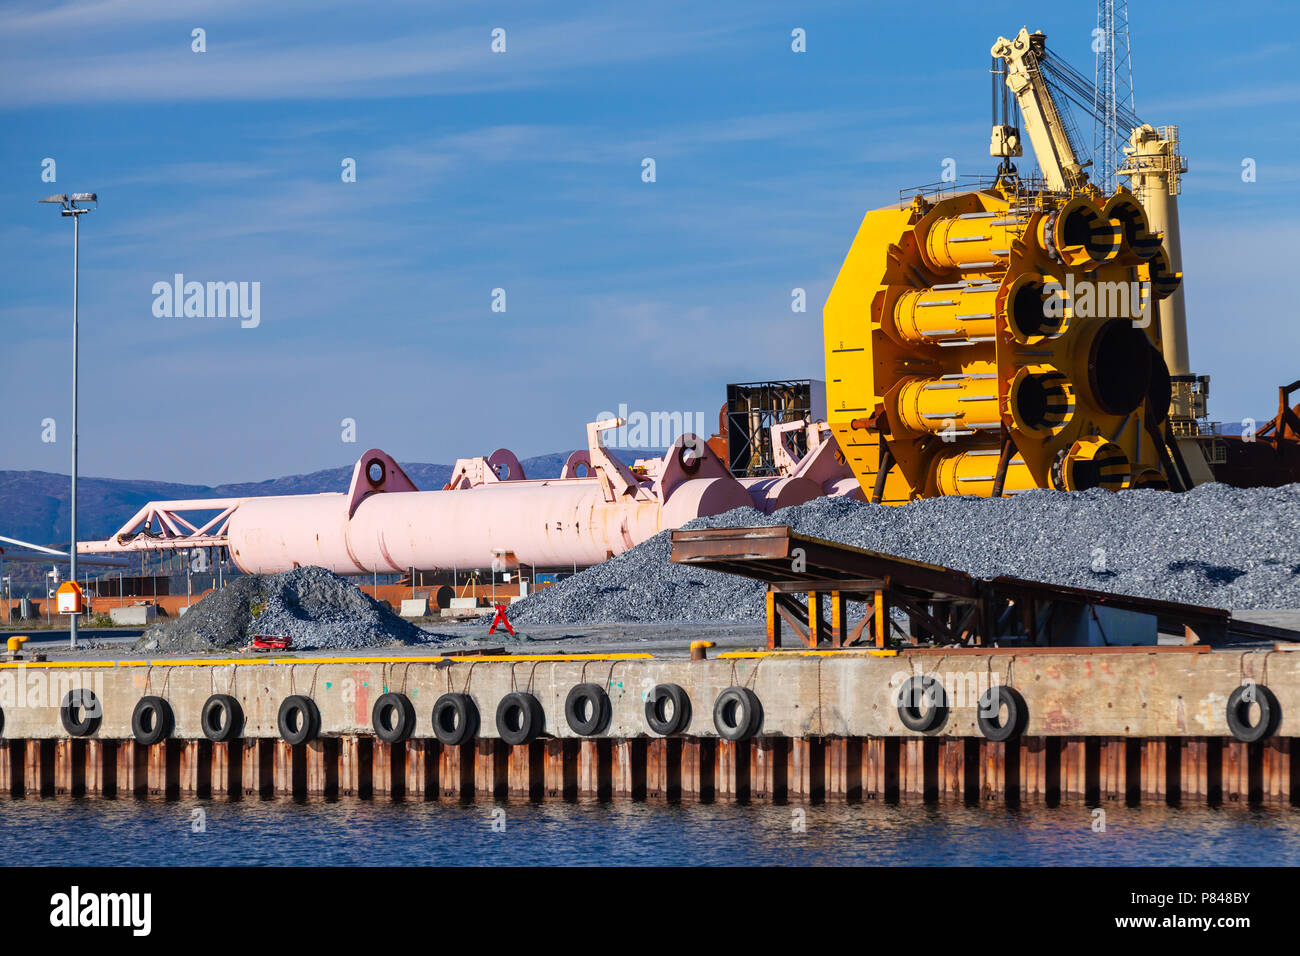 Parts of future production platform lay on the ground. Port of Verdal, Norway Stock Photo